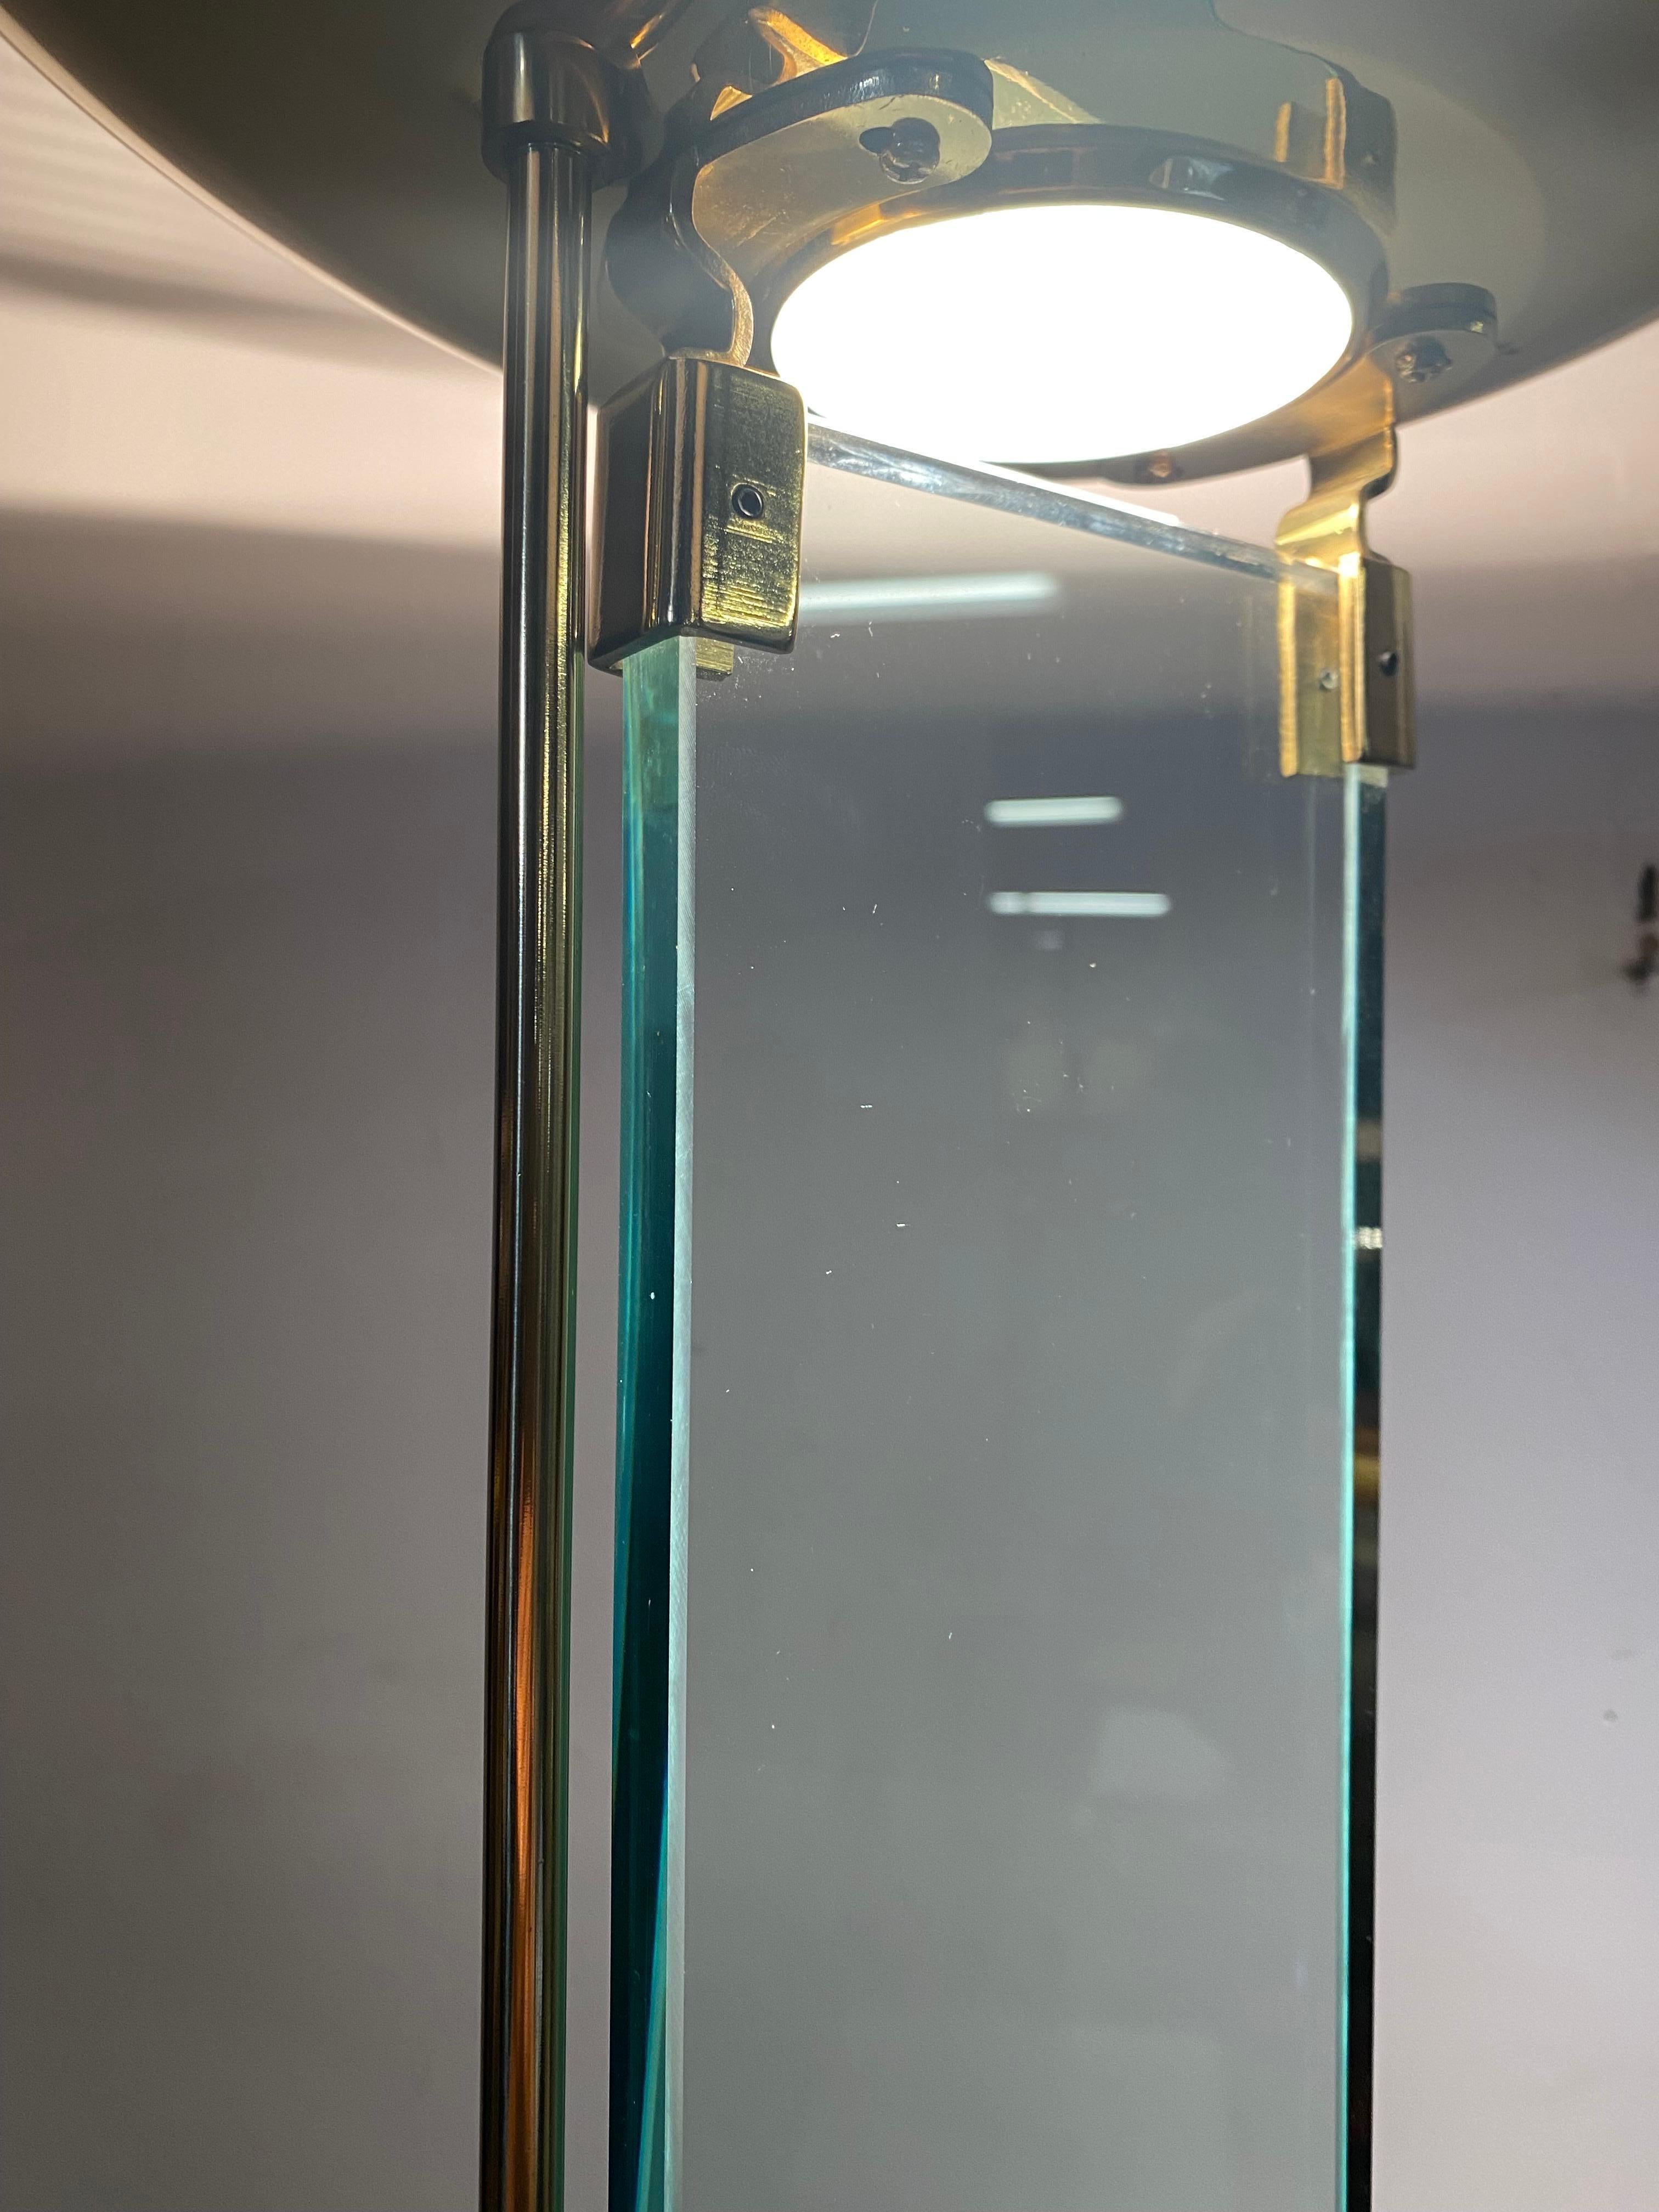 Polished brass and glass Italian torcher, floor lamp. Attributed to Mauro Martini, amazing quality and construction.